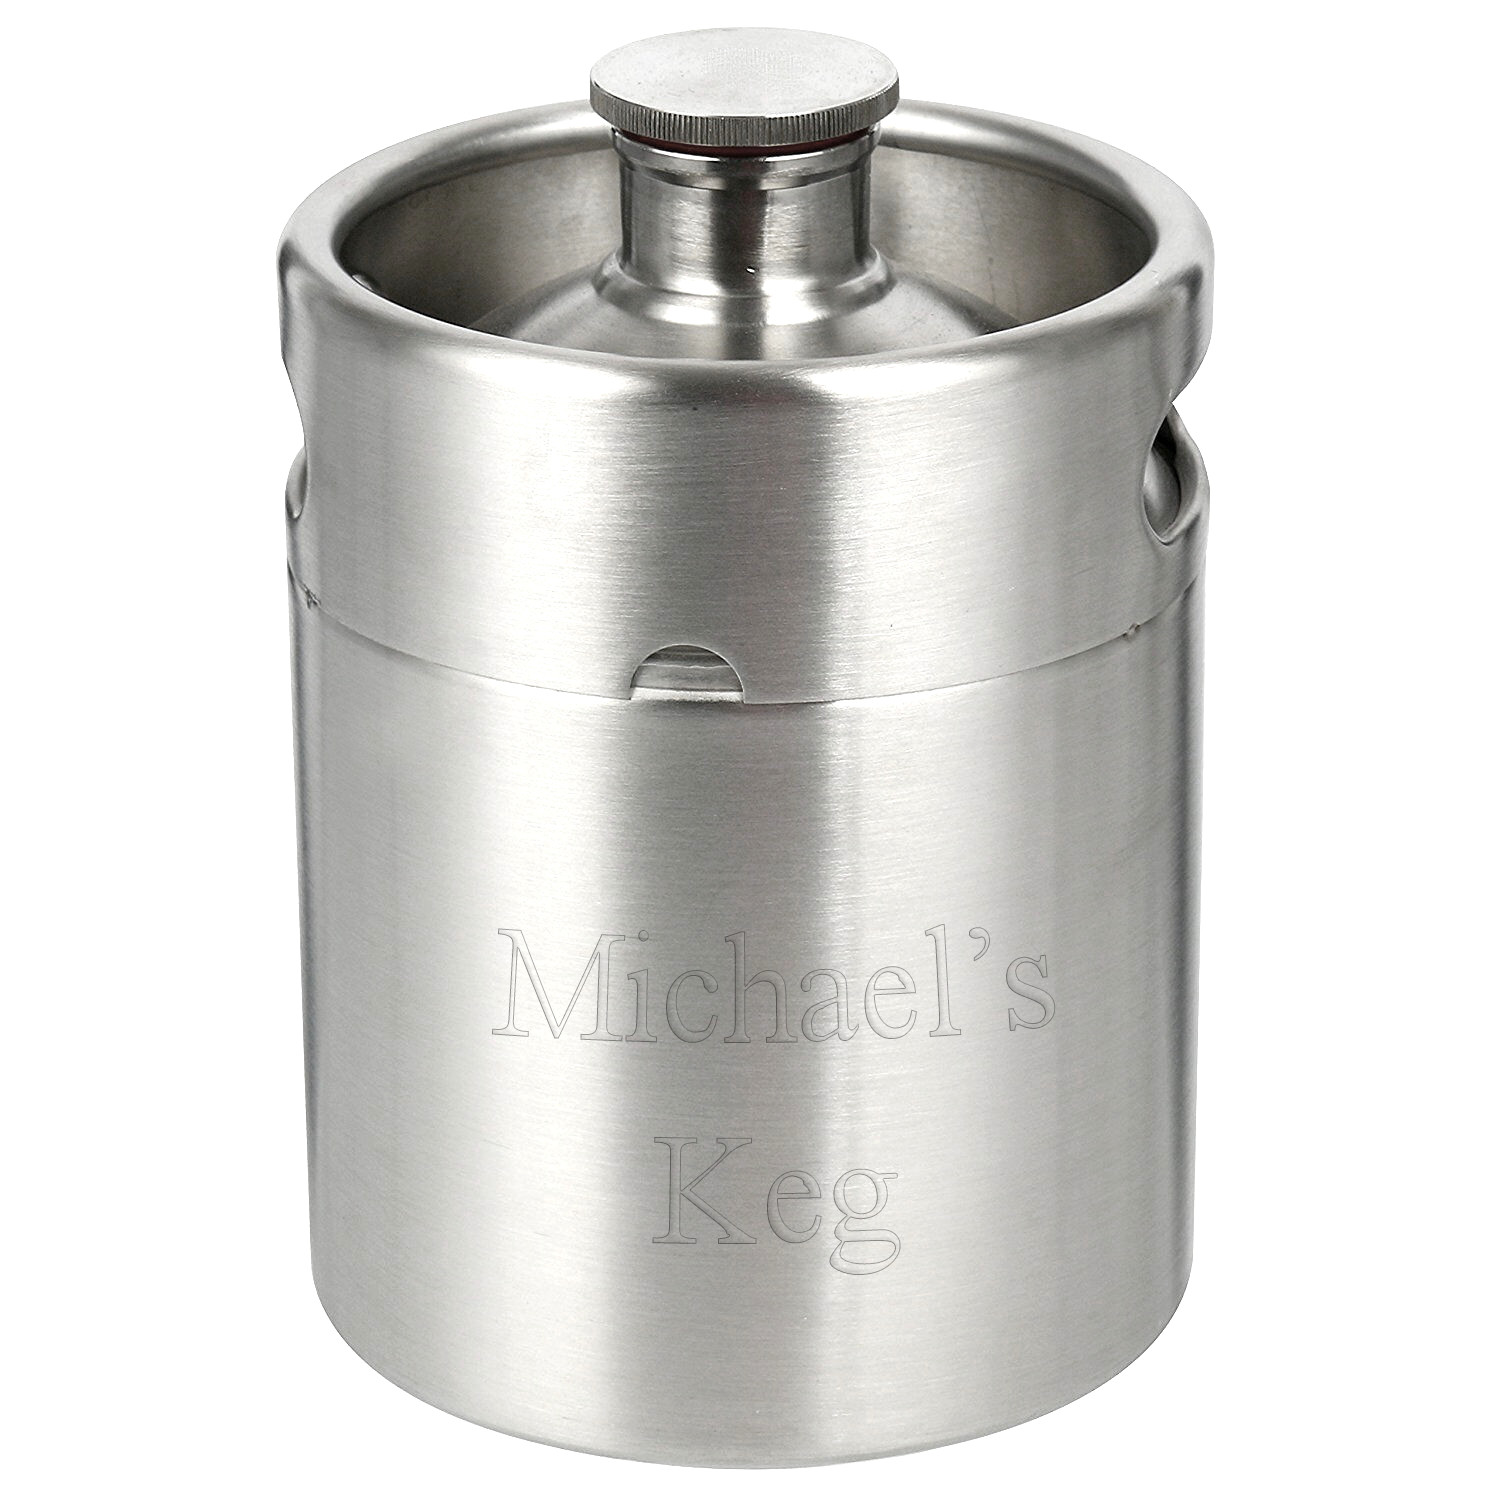 2L Beer Barrel Mini Keg Style Growler Stainless Steel Beer Supplies Holds Beer Double Handles for Home Camping Picnic 